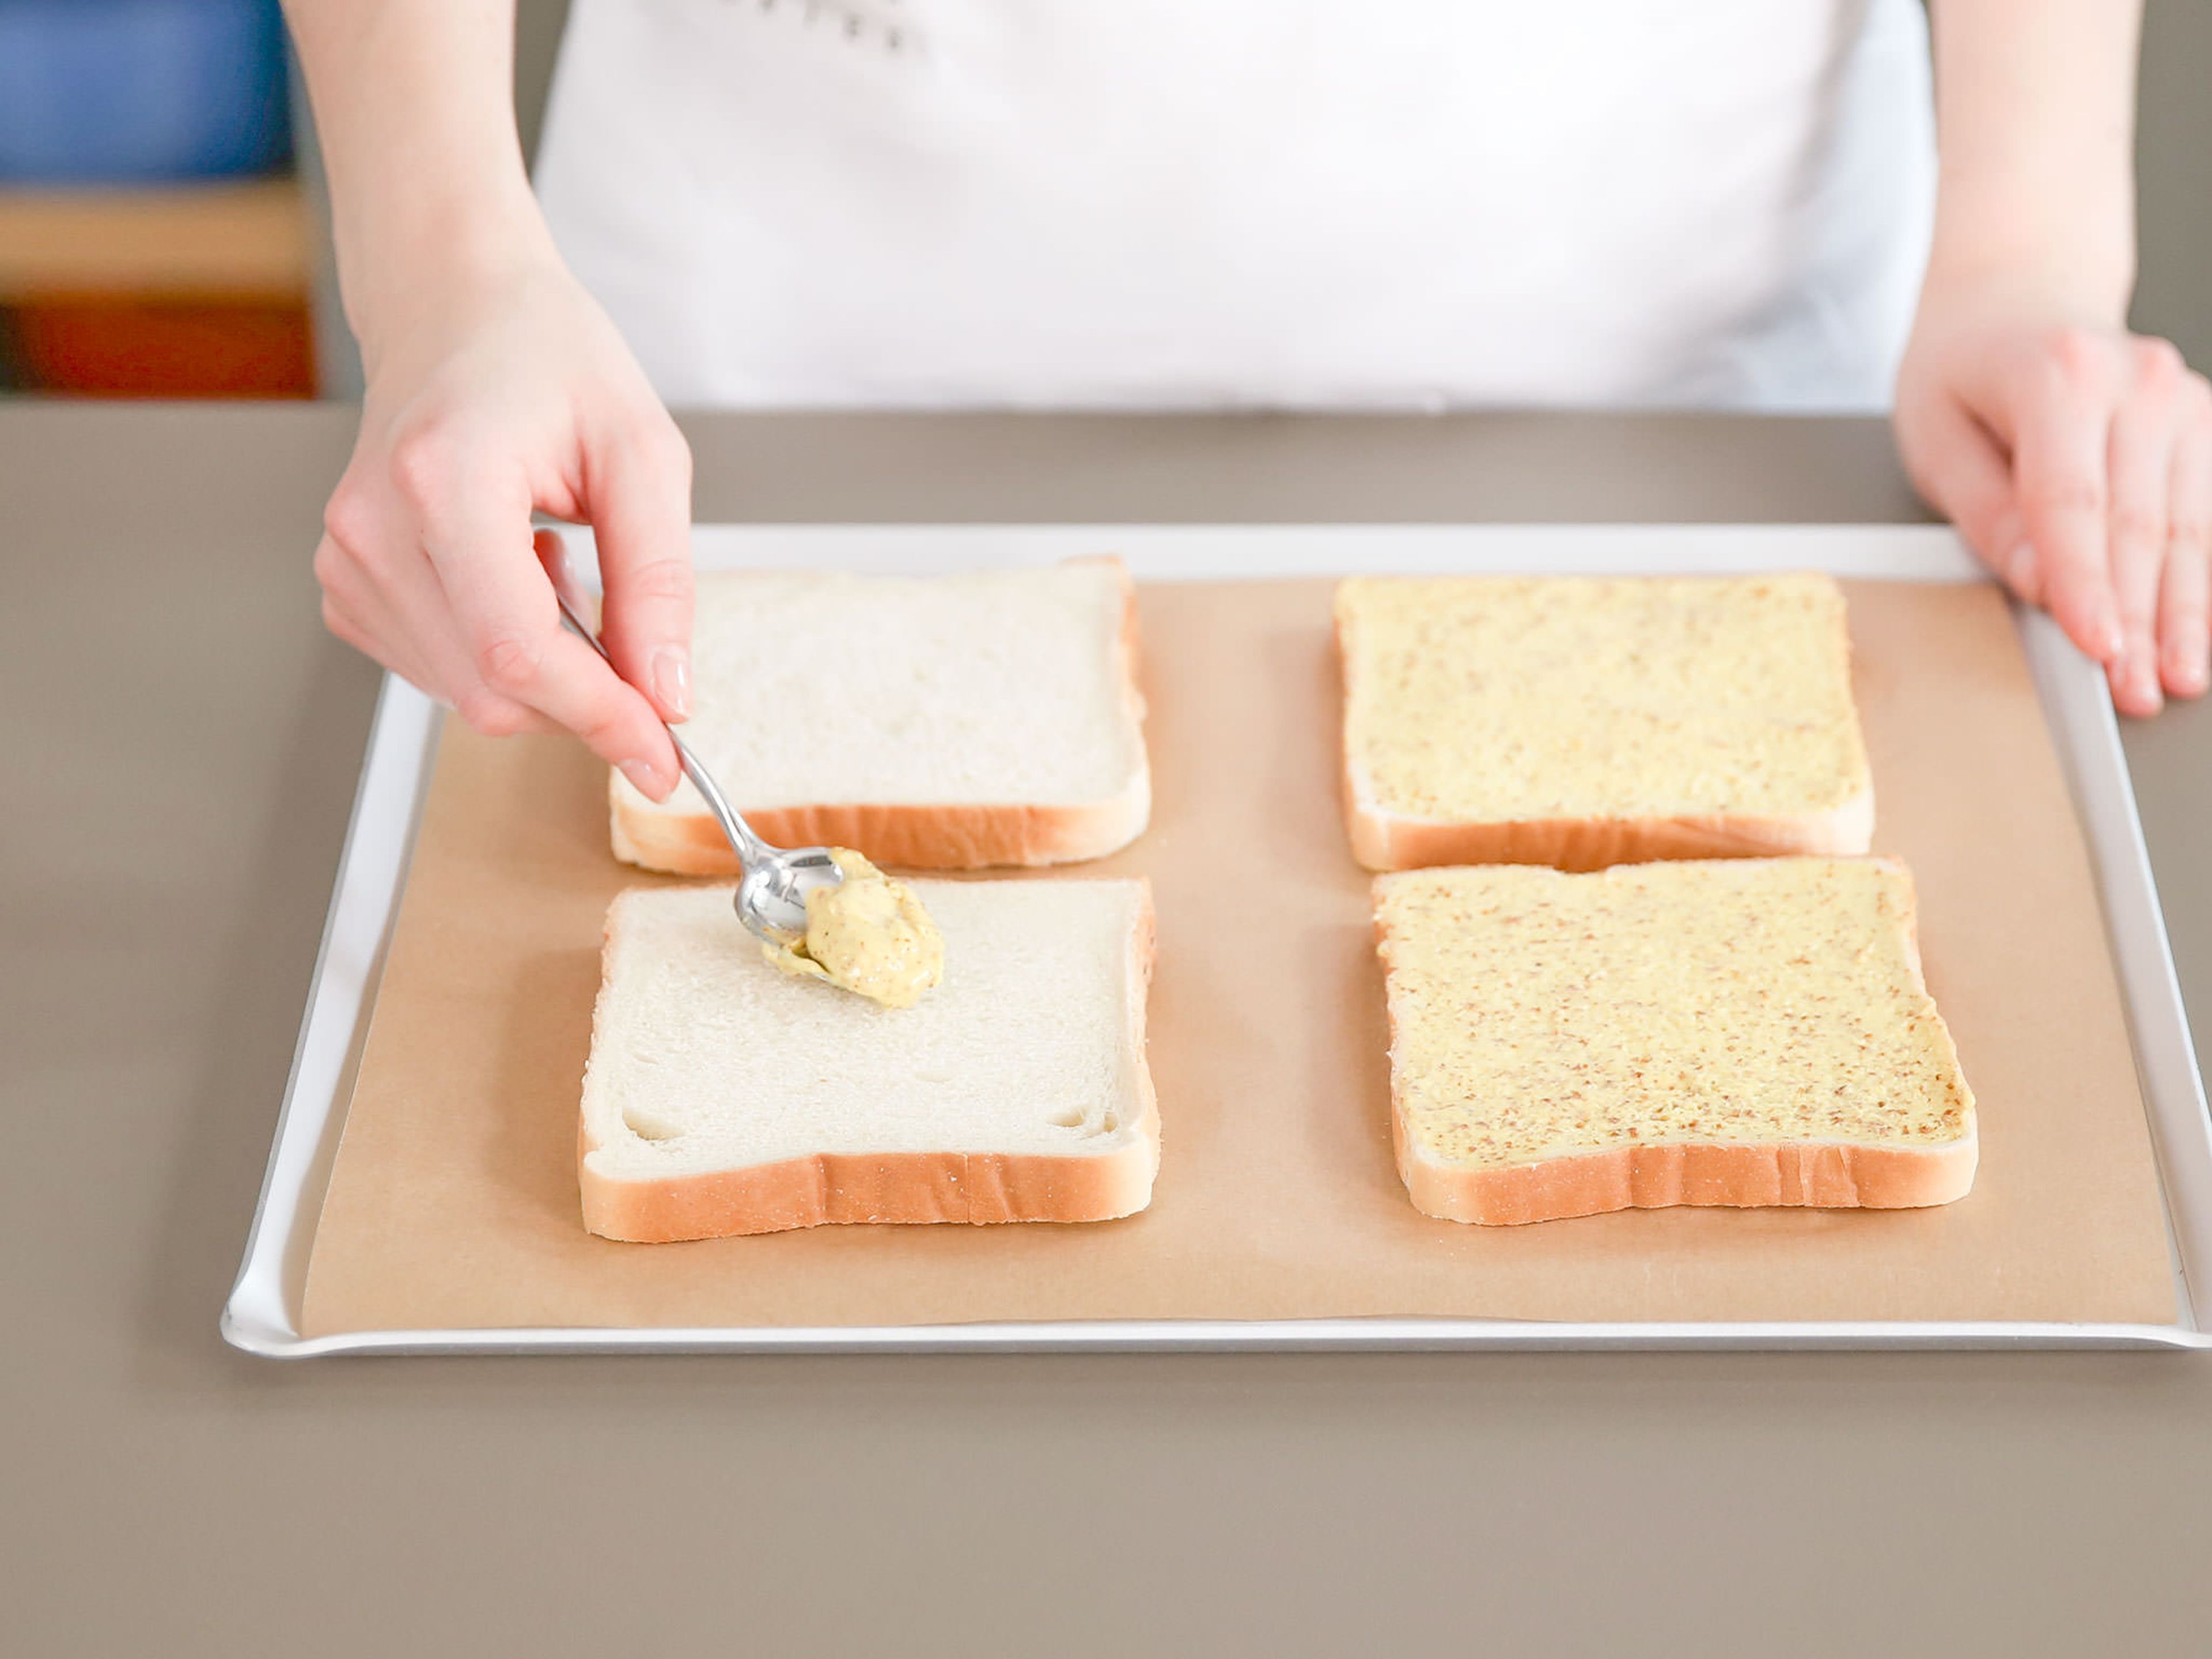 Preheat oven to 200°C/390°F. Place half of toasts on a parchment-lined baking sheet.Spread an even layer of mustard over them . Follow up with a slice of ham, a slice of cheese, and an even layer of part of the sauce Mornay.